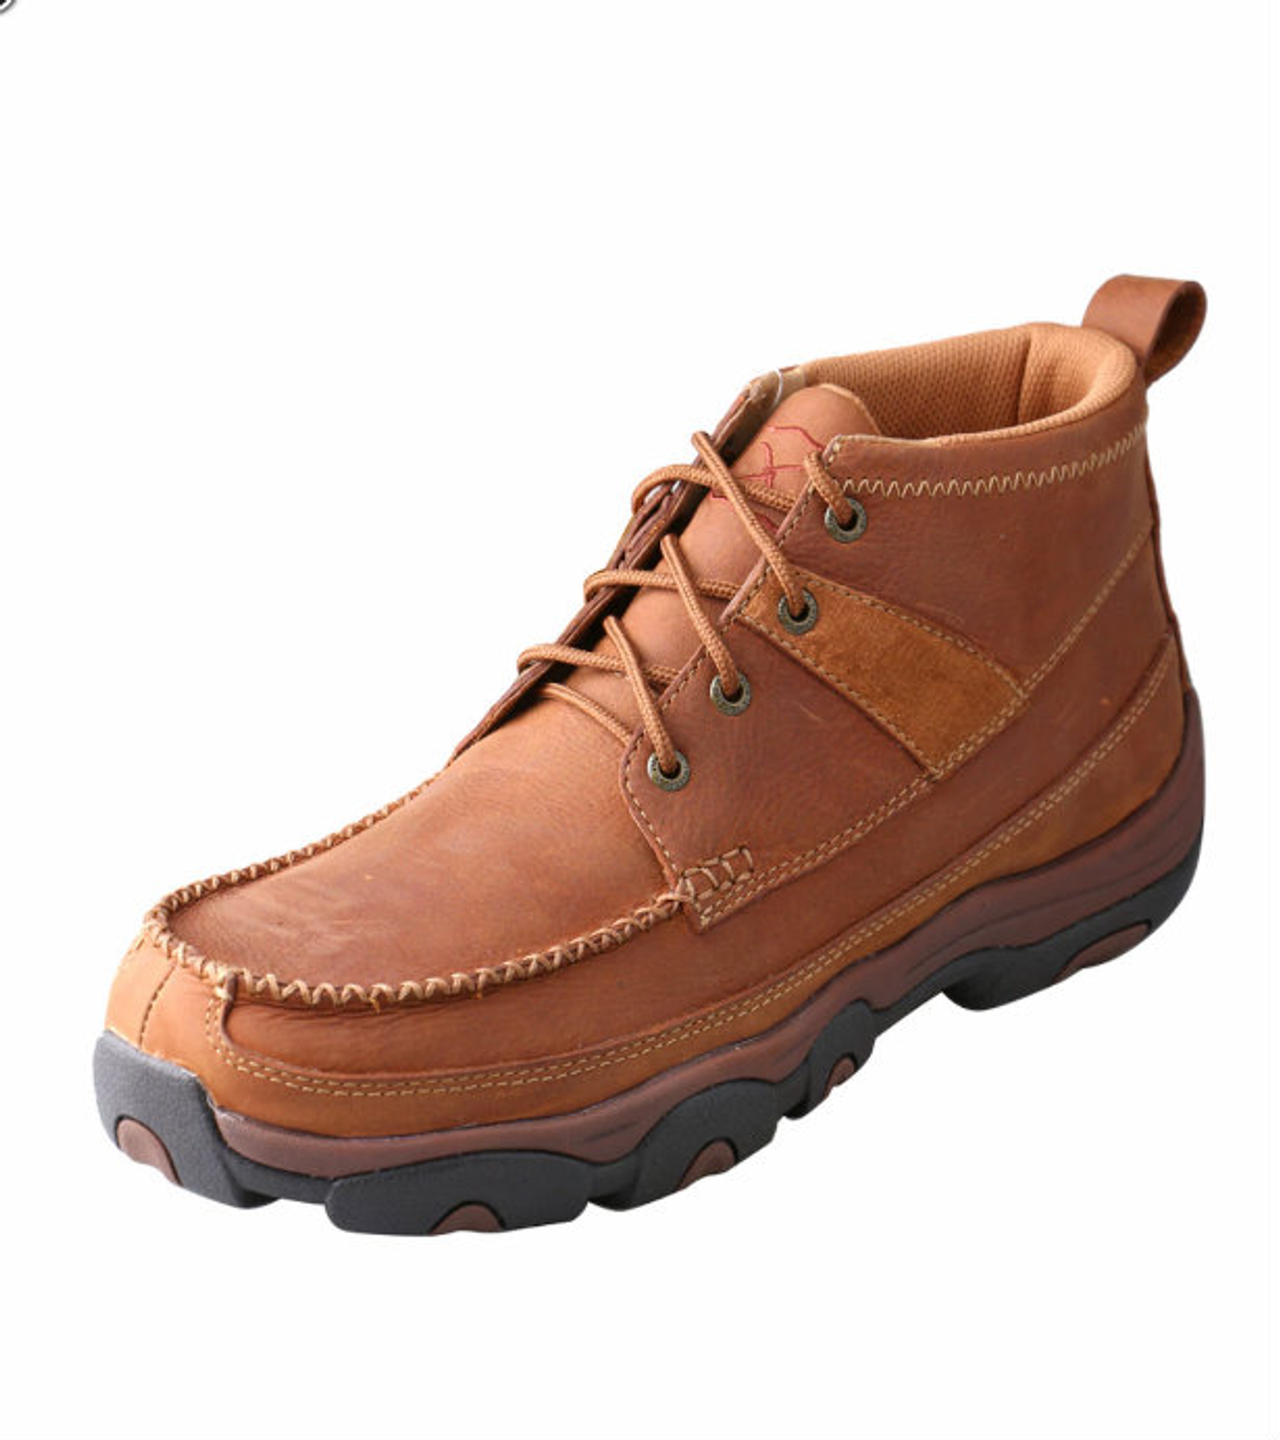 MEN'S TWISTED X LACE-UP HIKING SHOES FROM DENNARDS